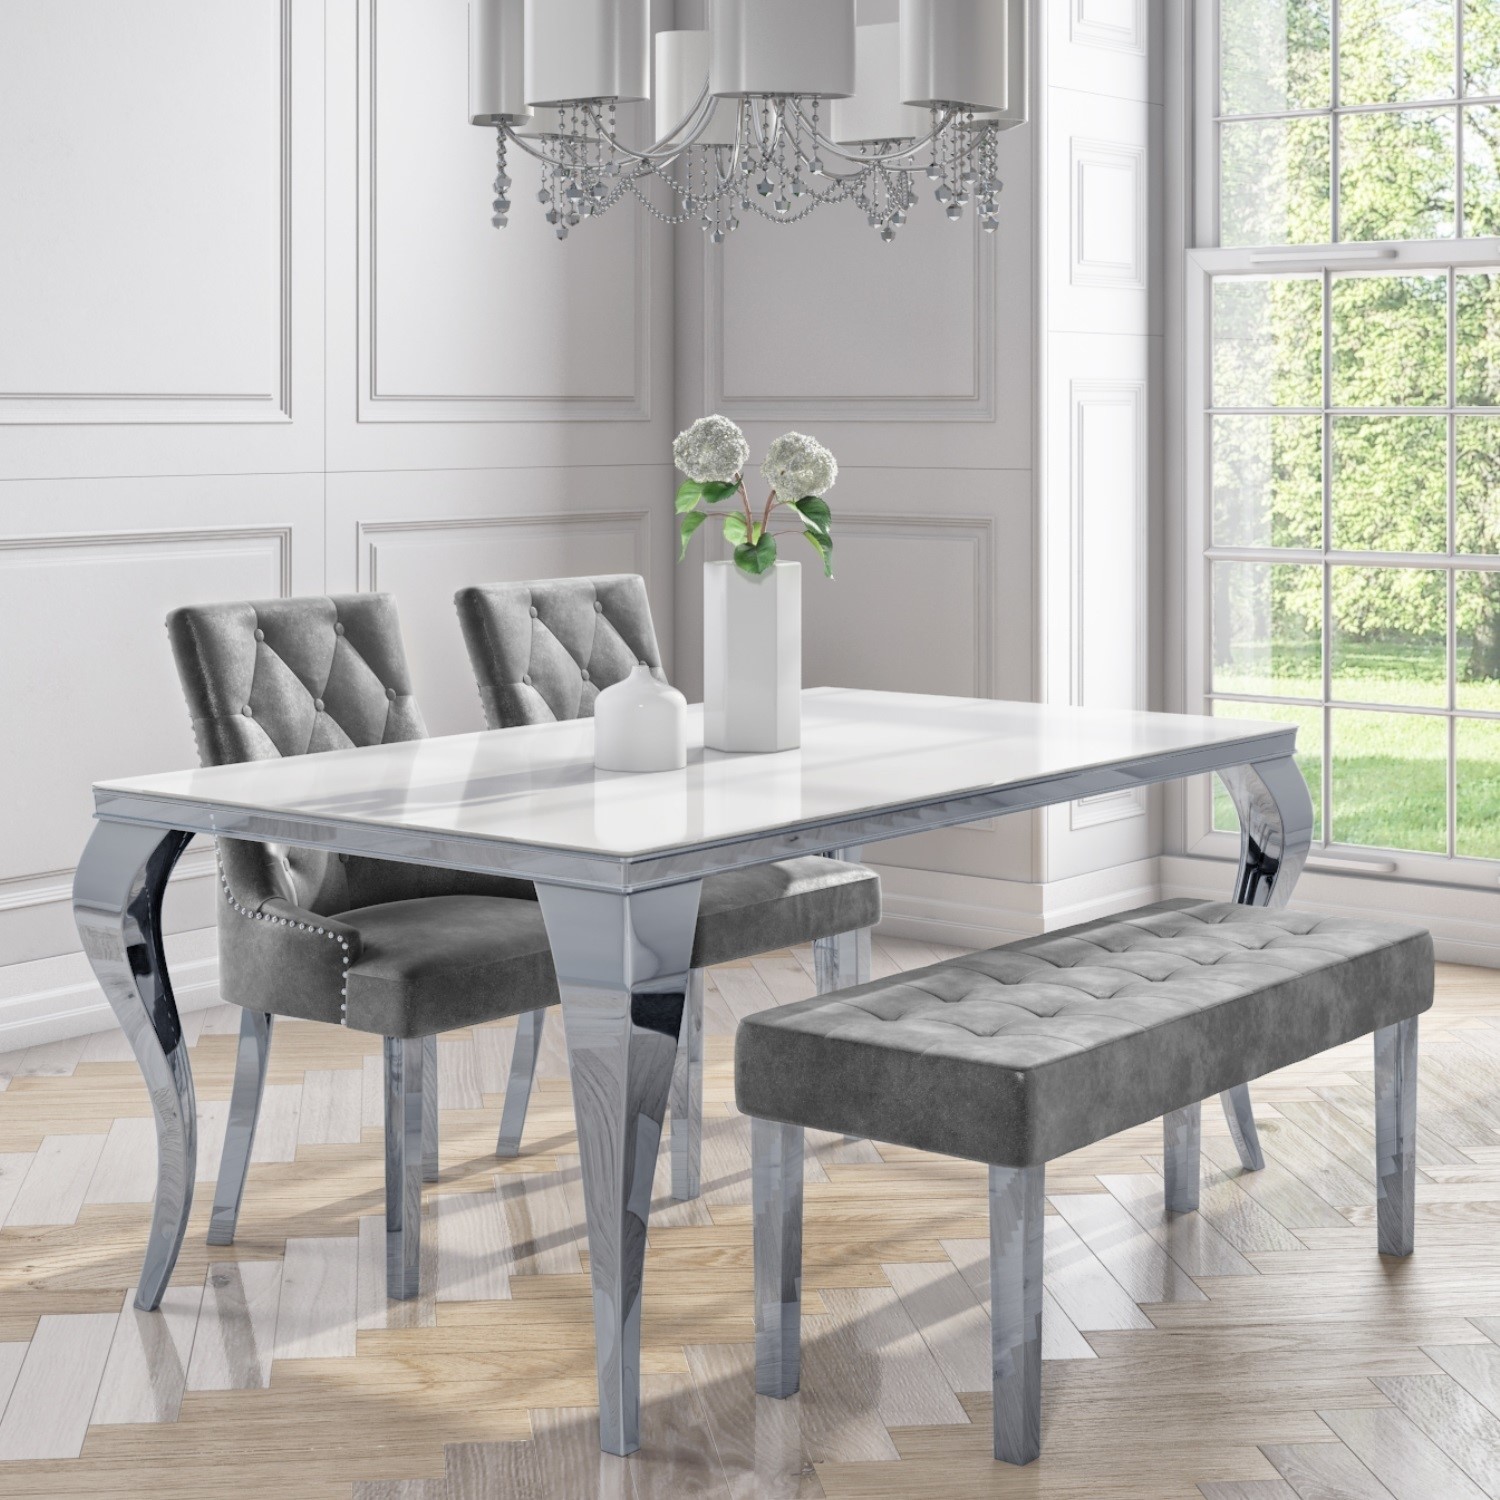 4 Seater Dining Set With White Table 2 Grey Velvet Chairs And 1 Bench Jade Boutique Furniture123